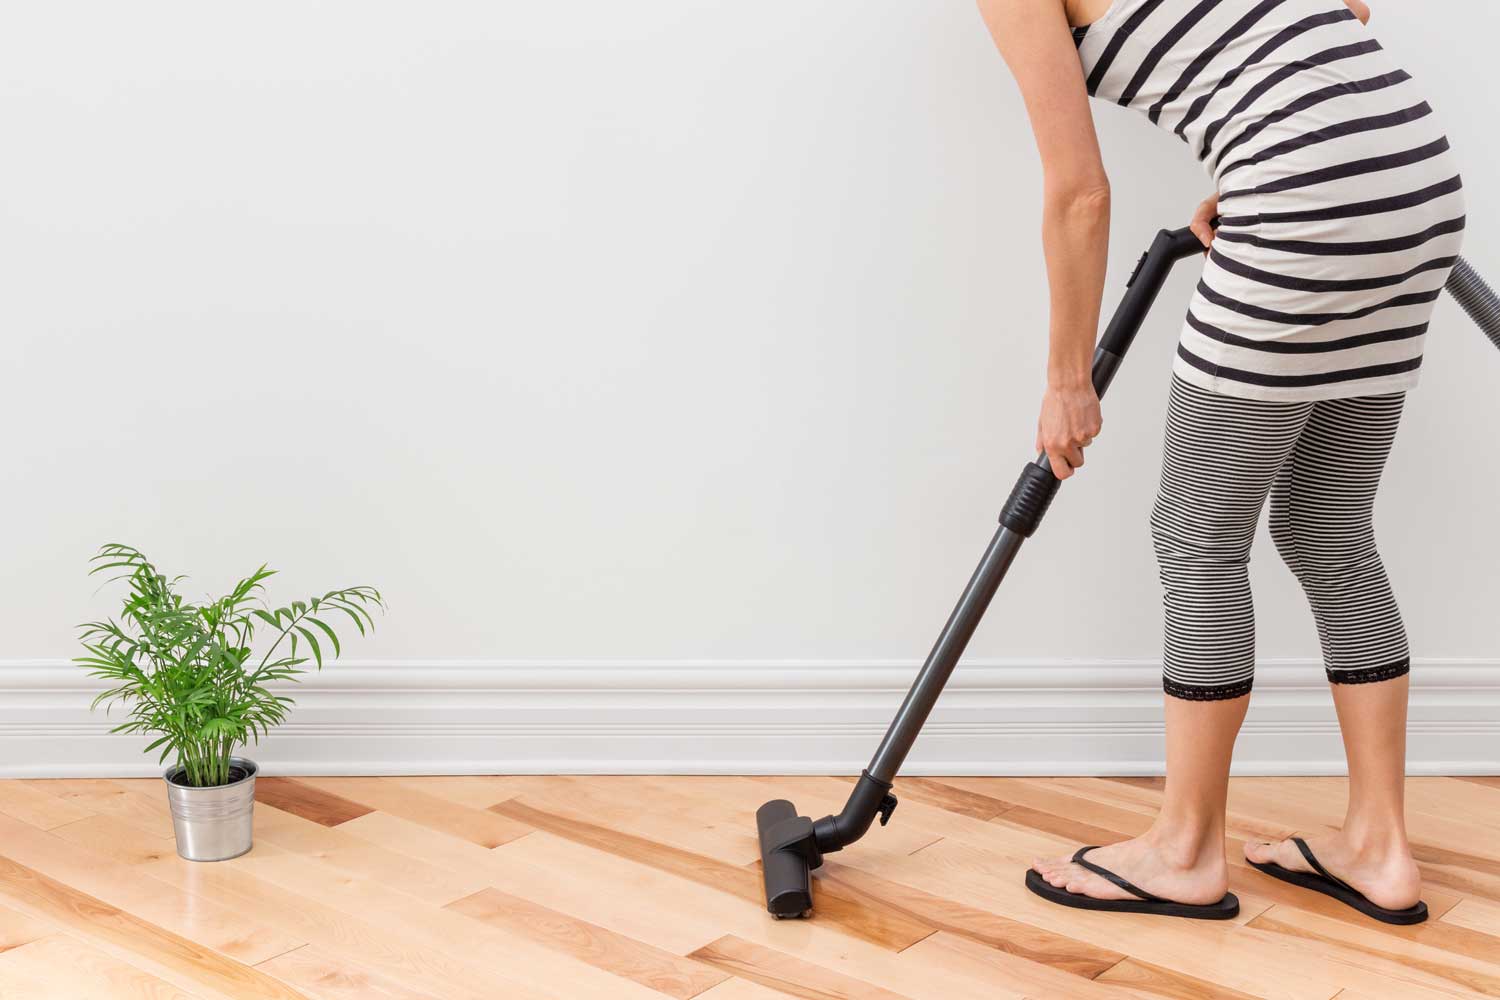 Regulary vacuum or sweep floors to remove dirt and keep your home floors looking amazing - tips from Footprints Floors in Little Rock.